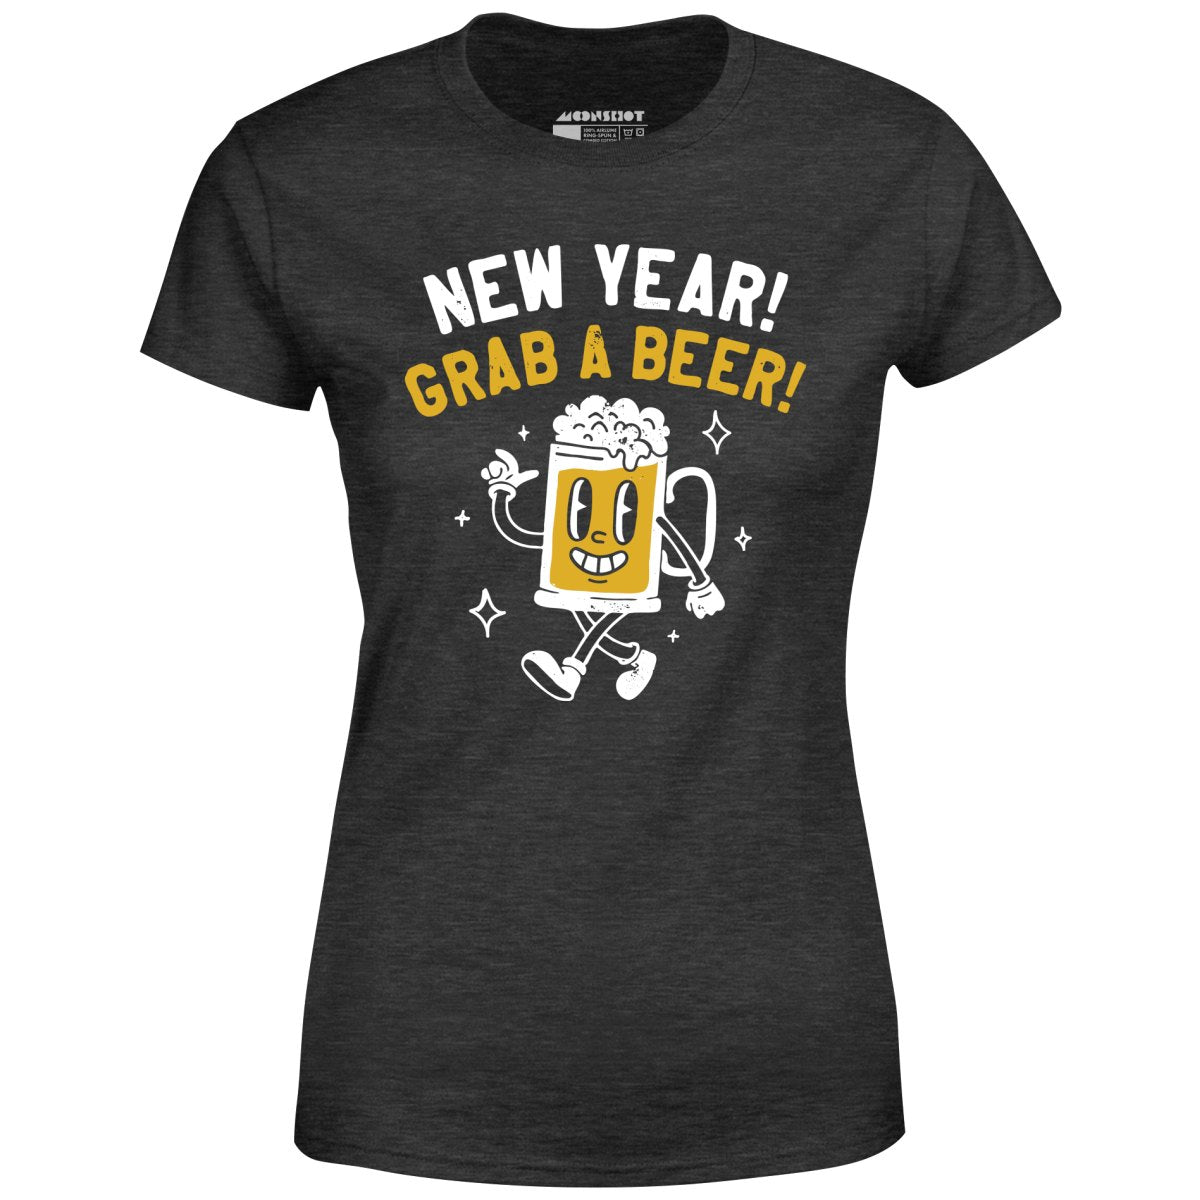 New Year Grab a Beer - Women's T-Shirt